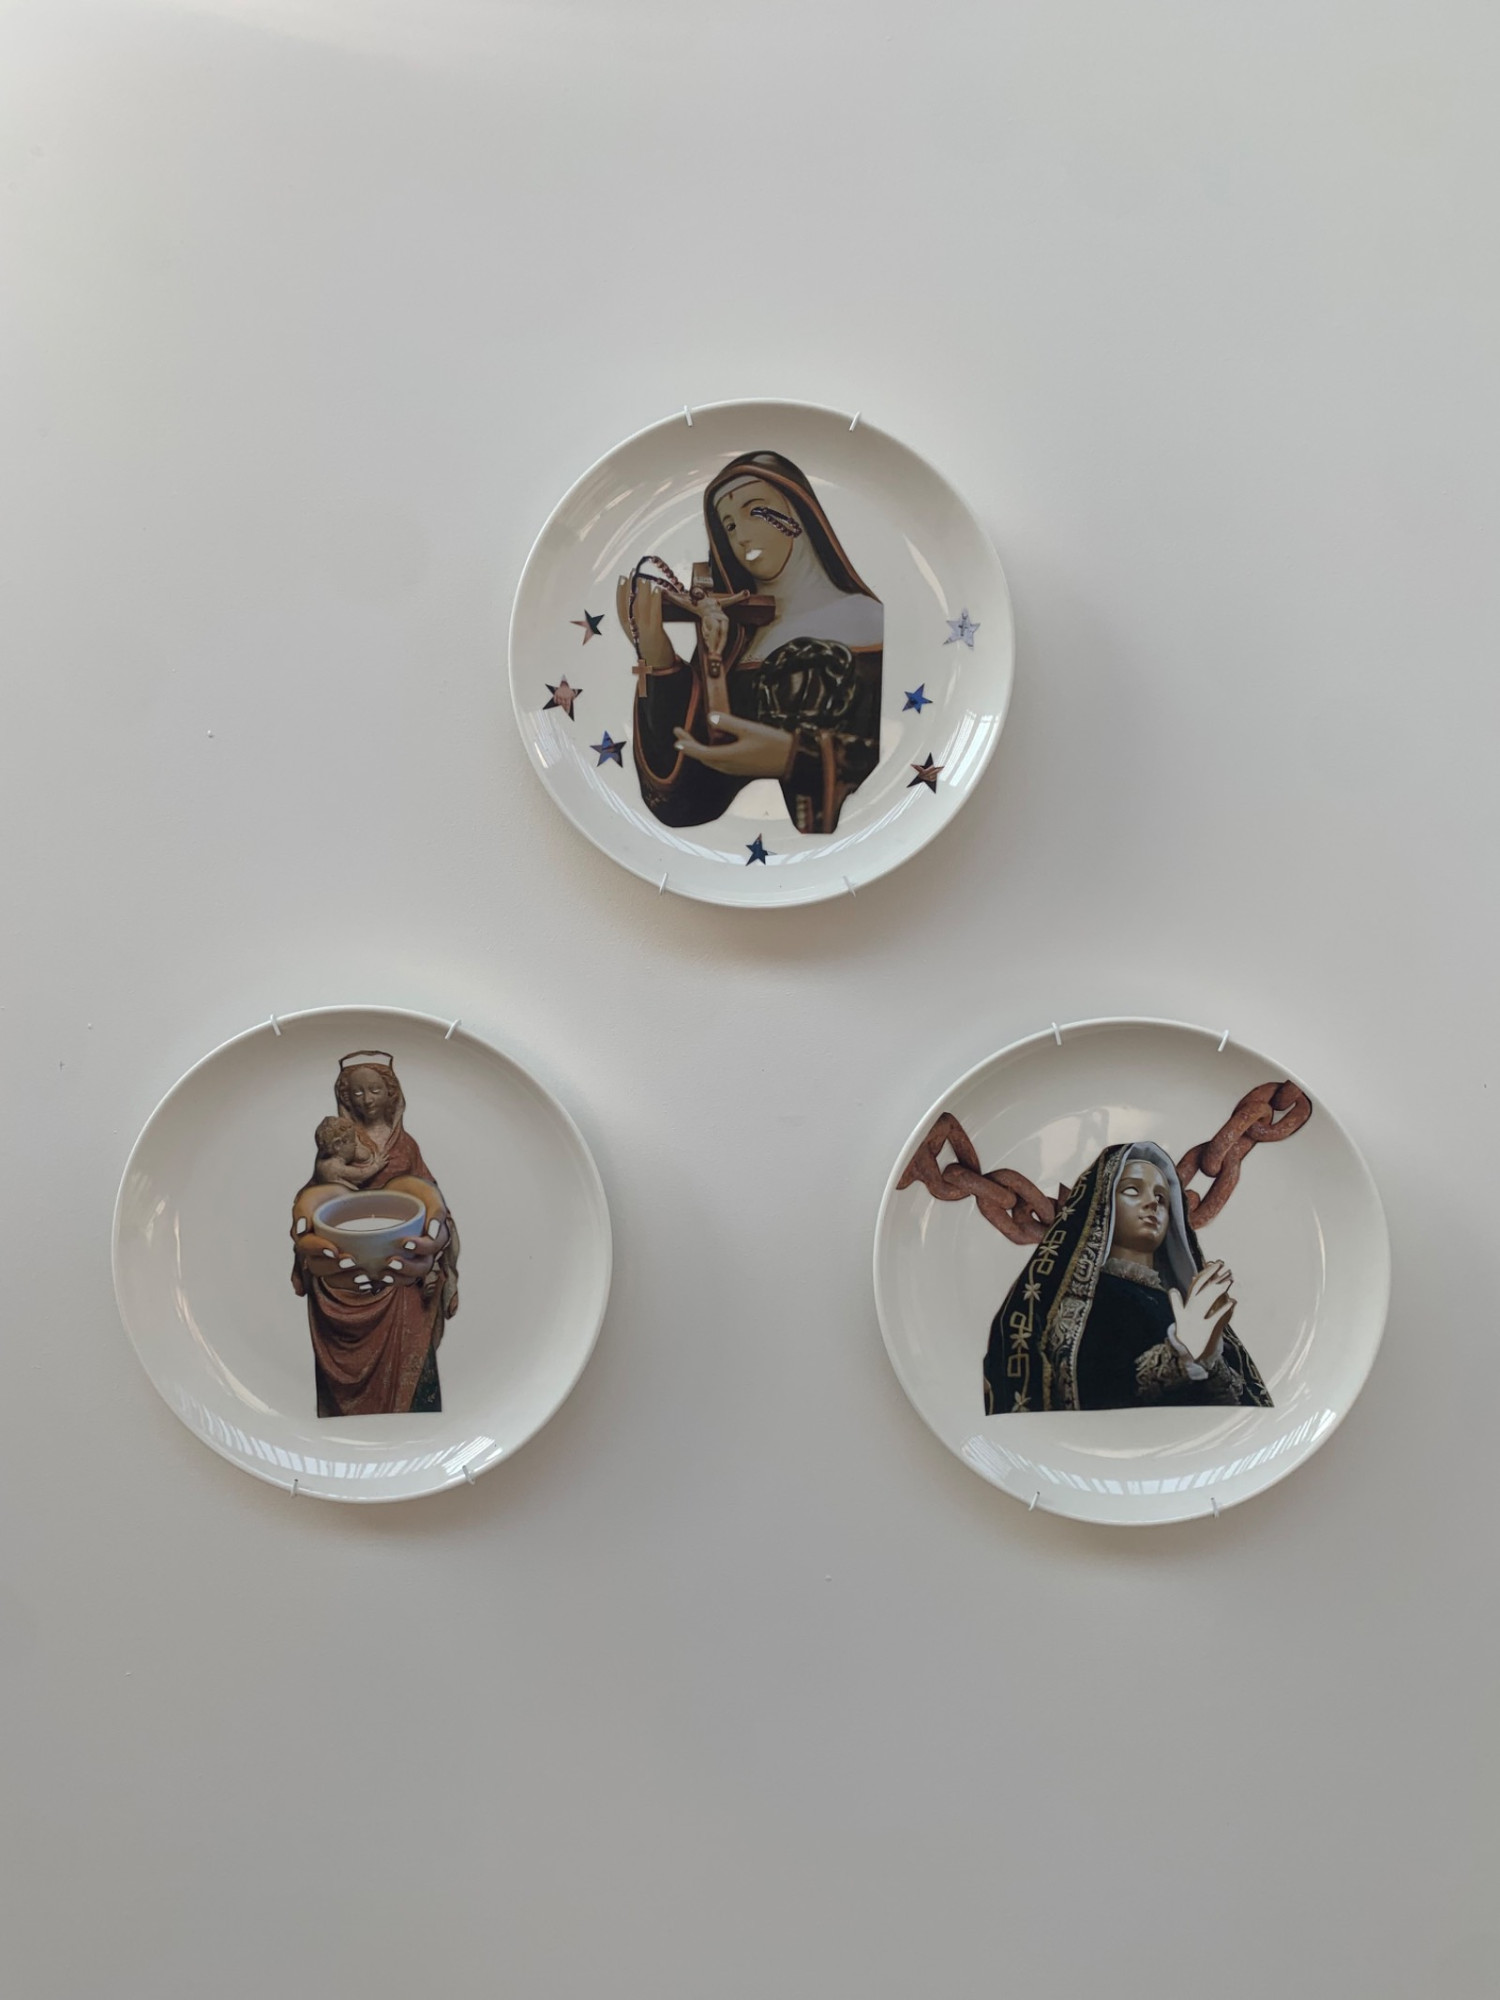 Tryptic plates